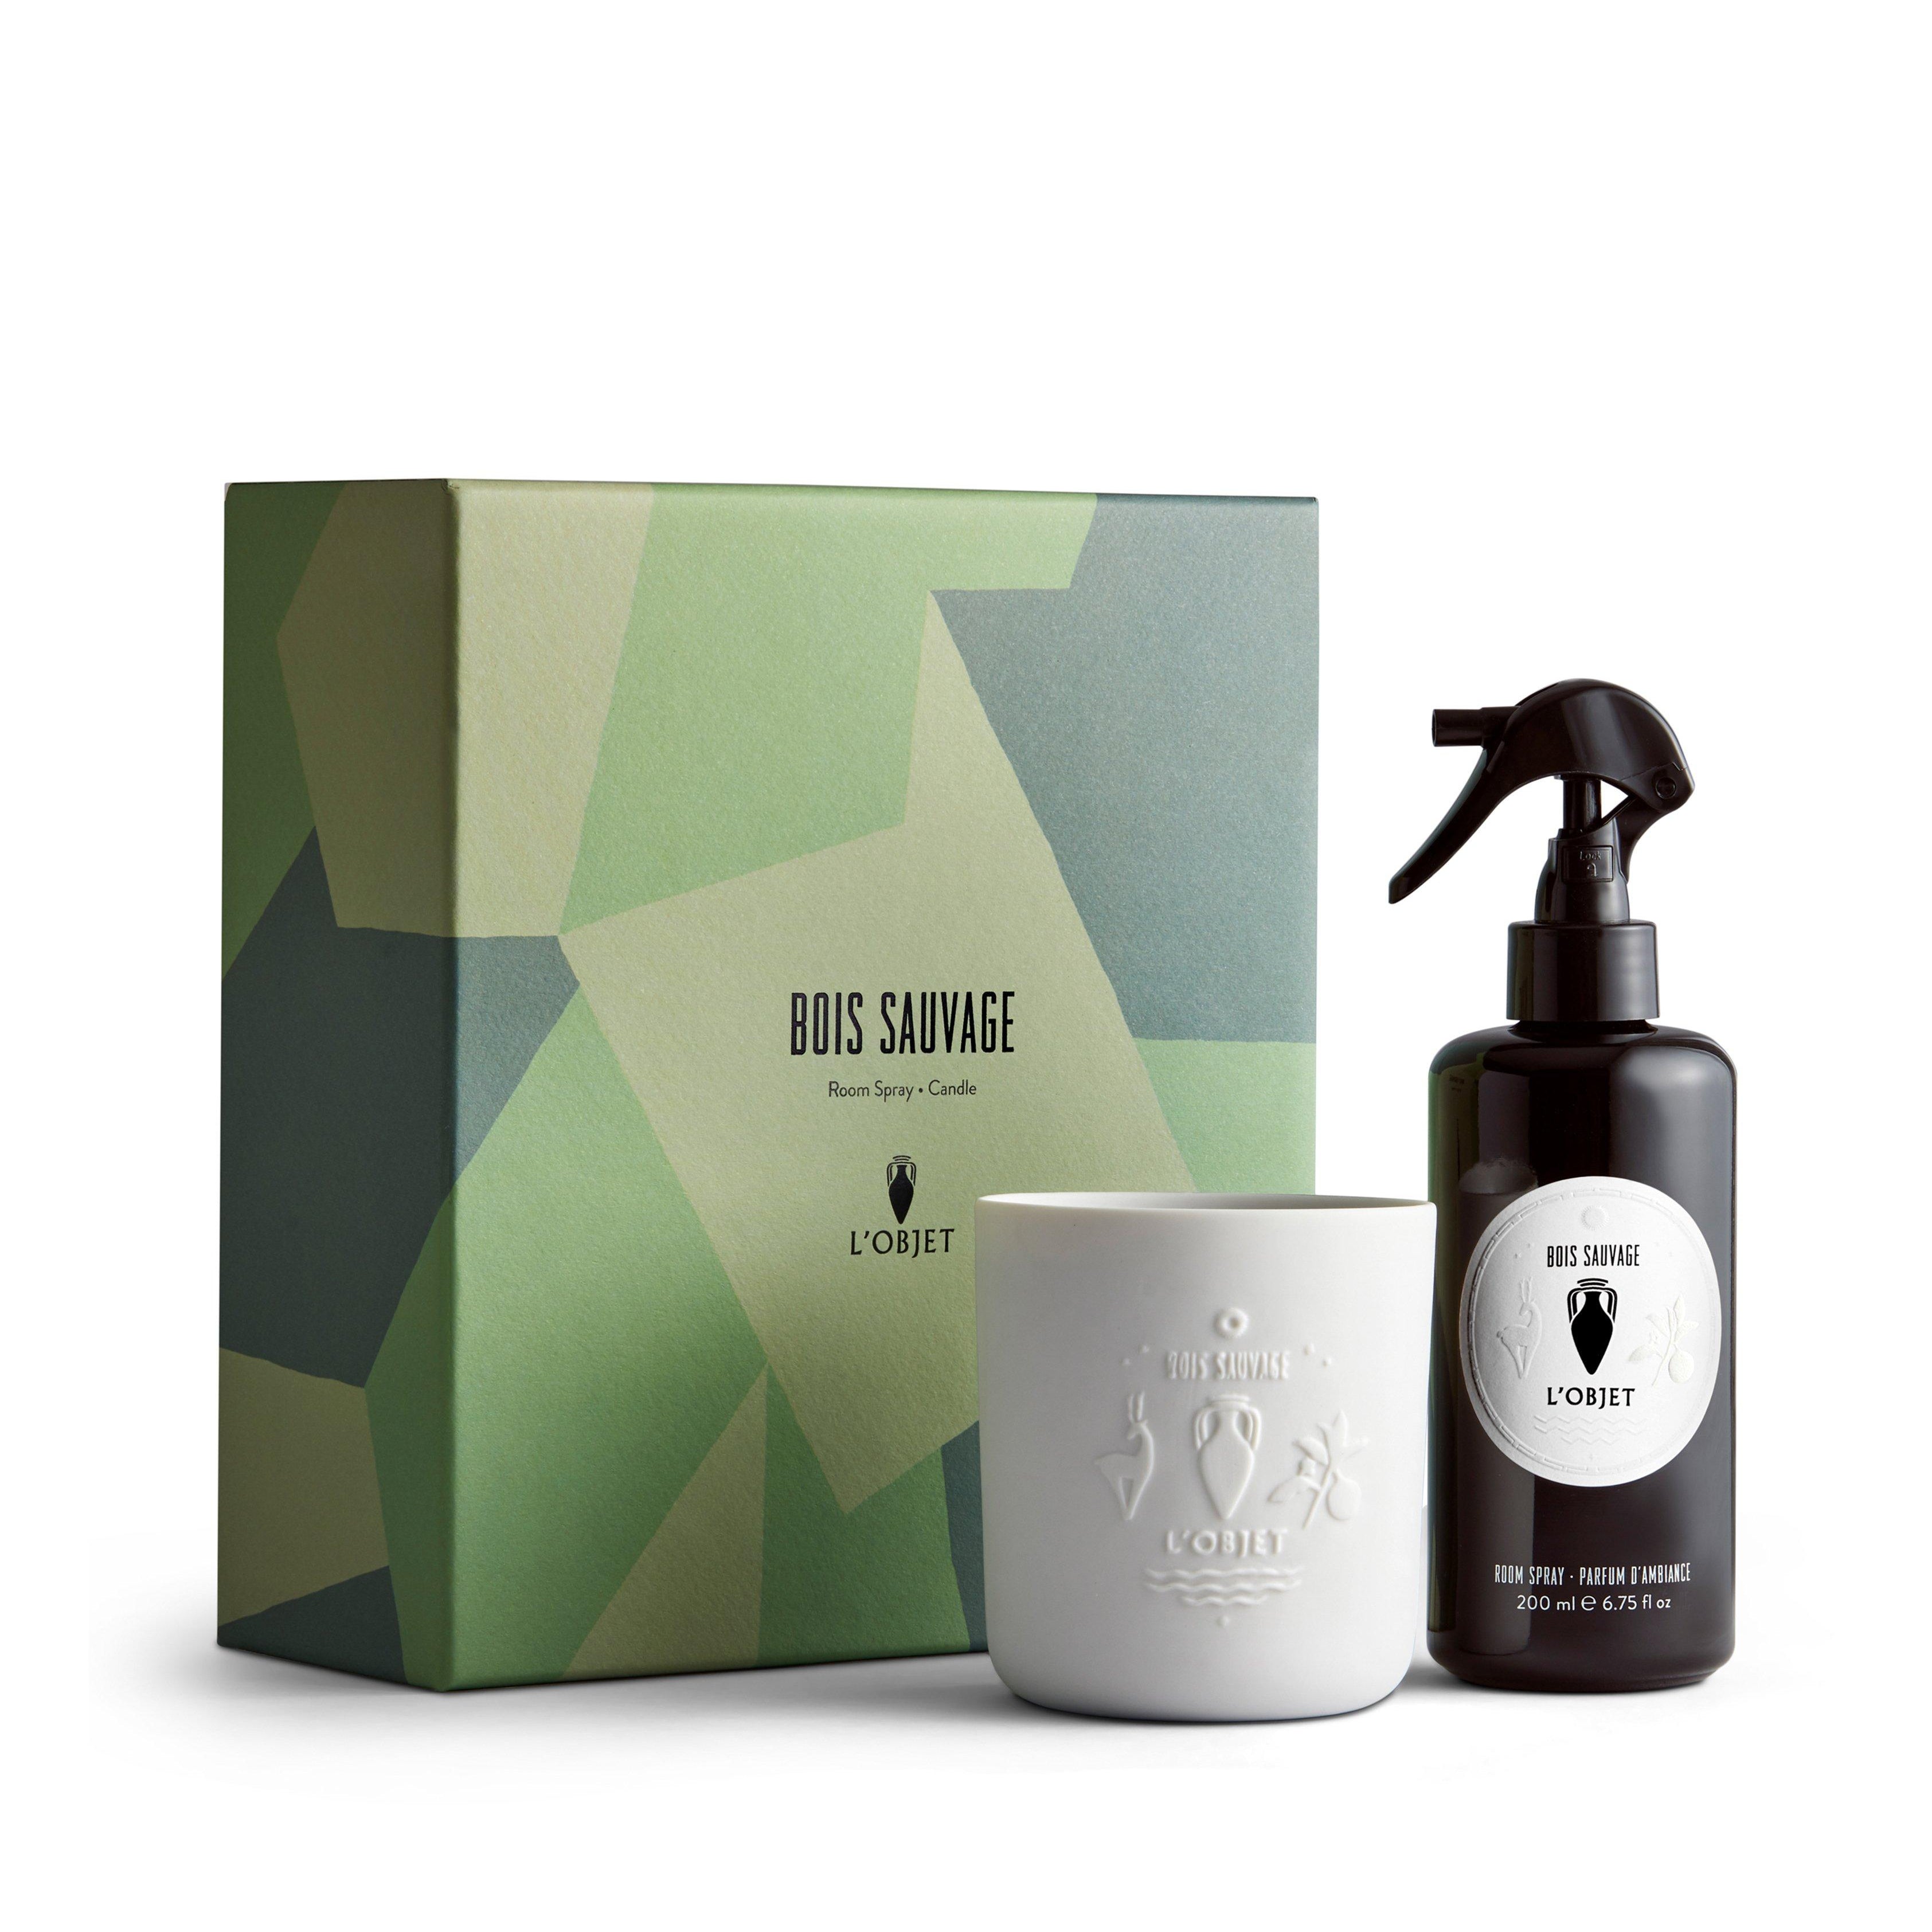 L'Objet Luxurious Room Spray + Candle Gift Set